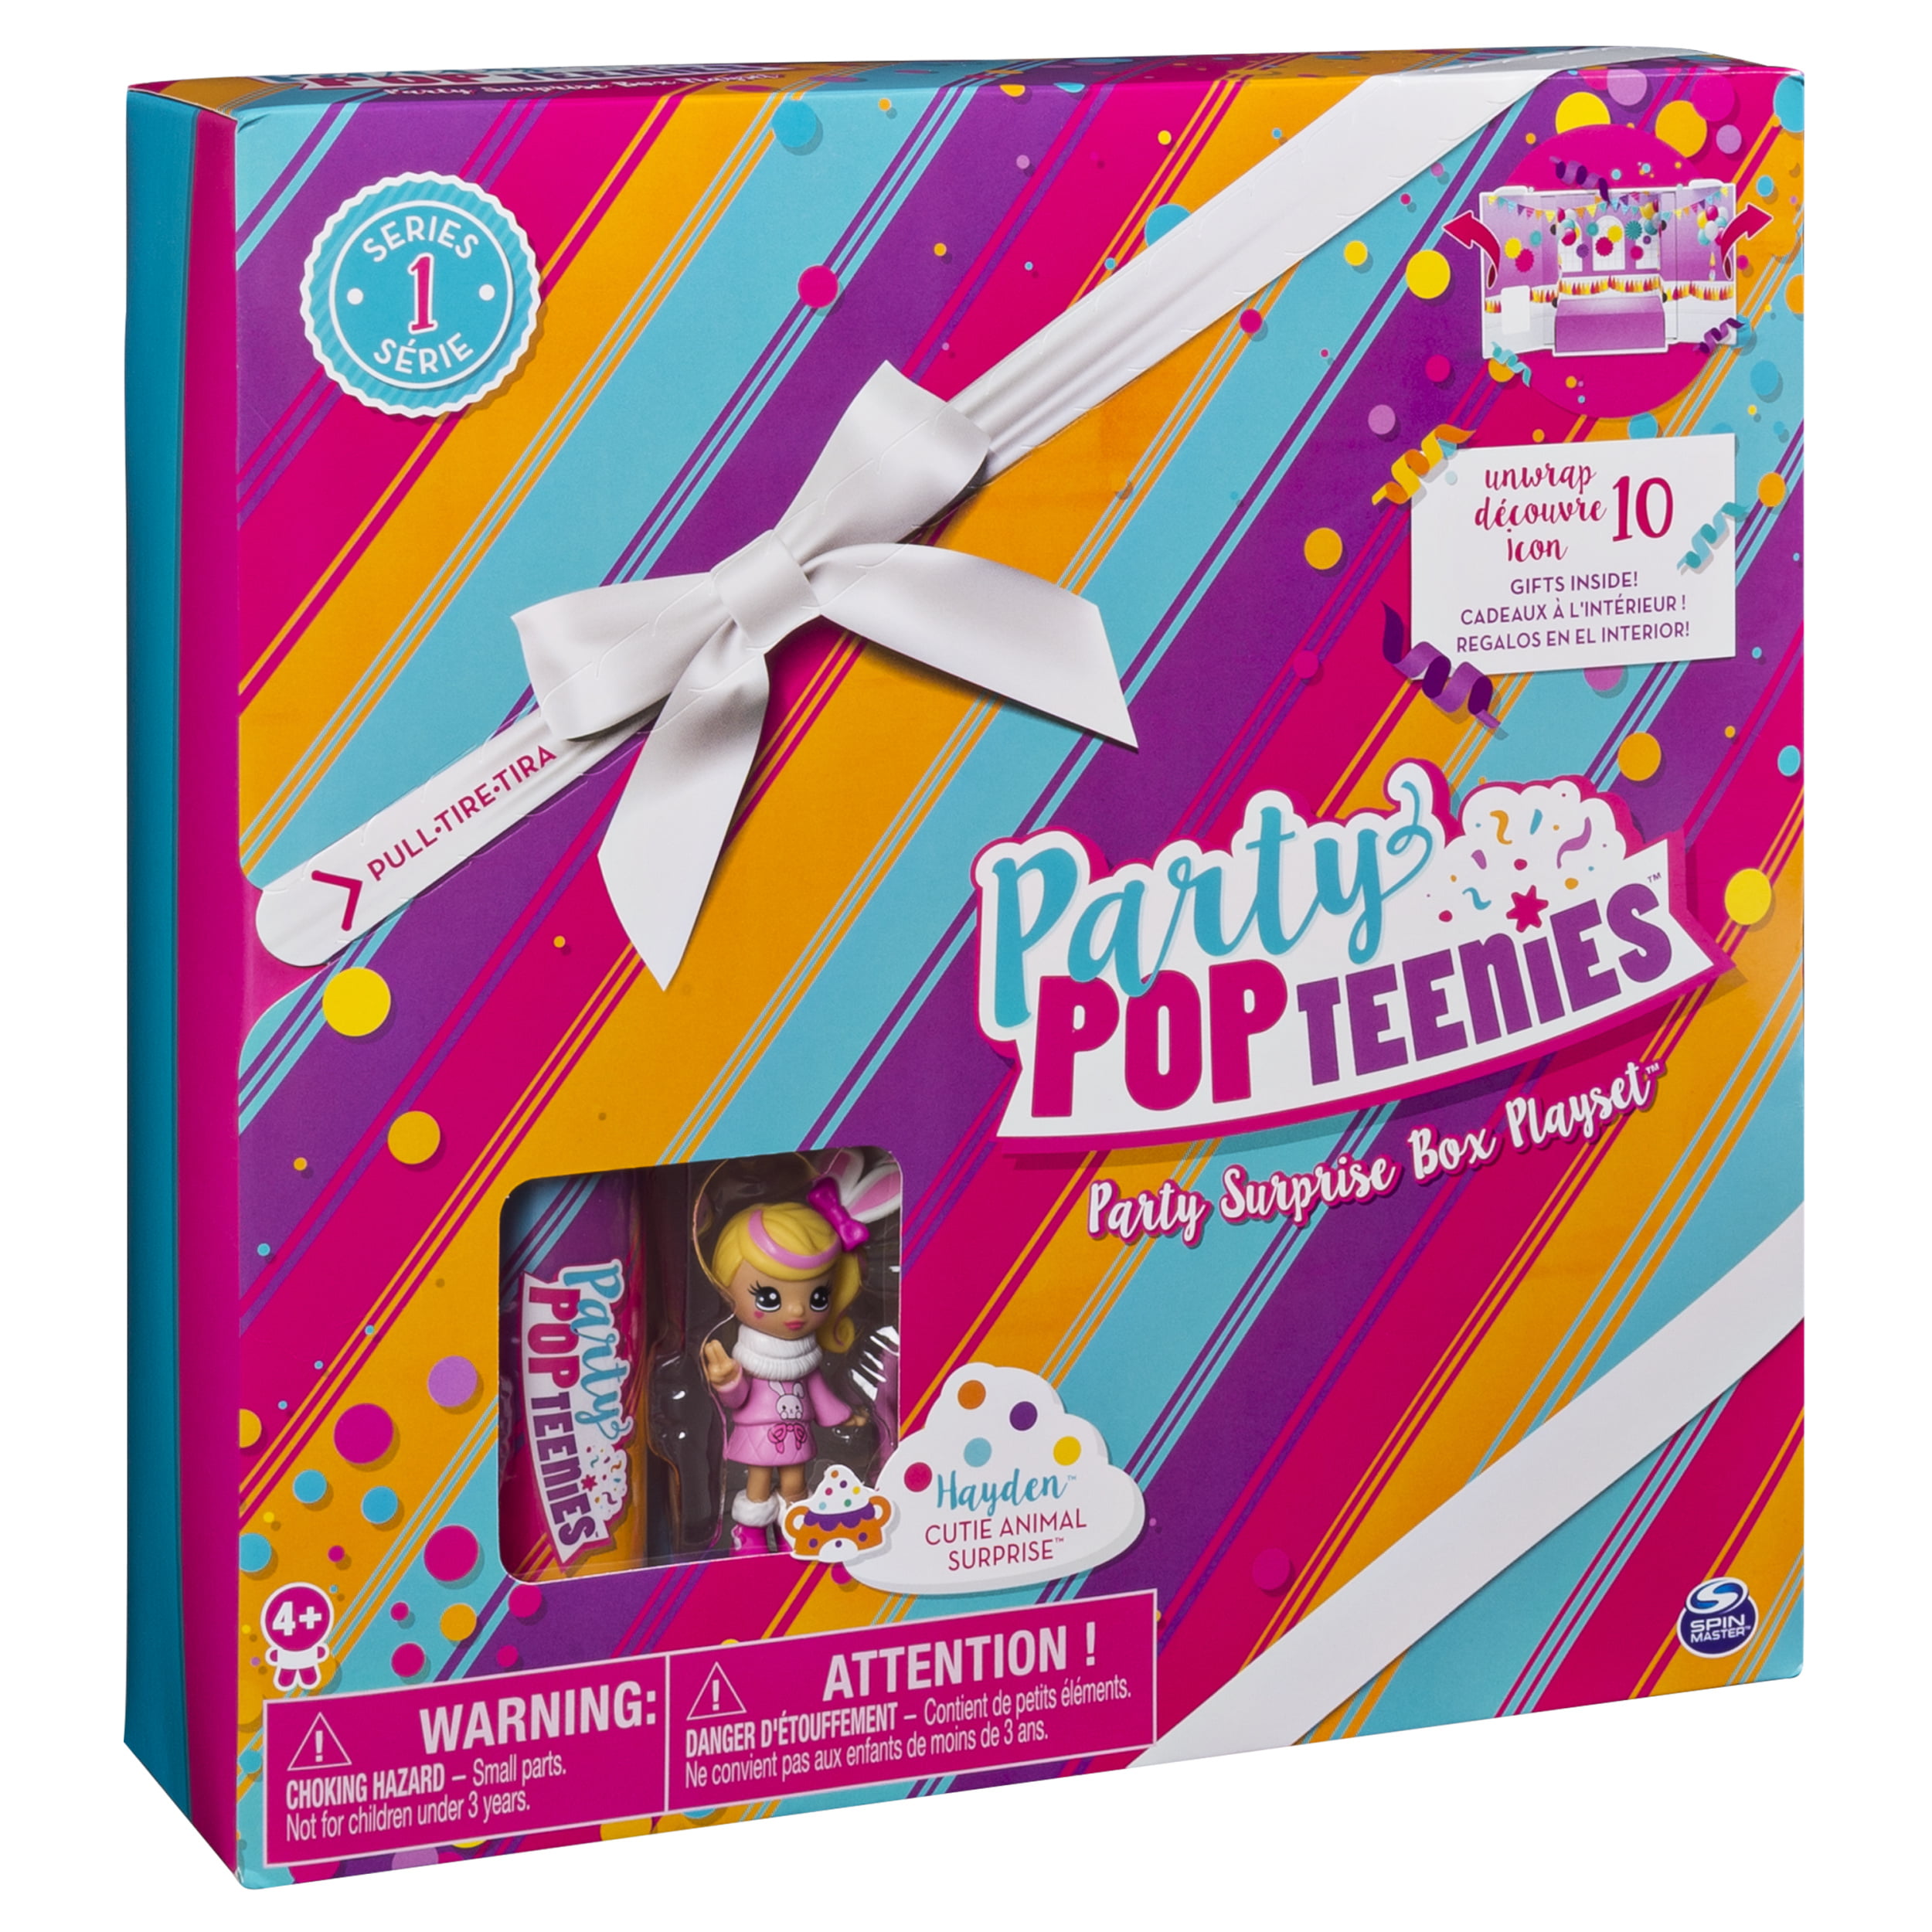 party popteenies party surprise box playset